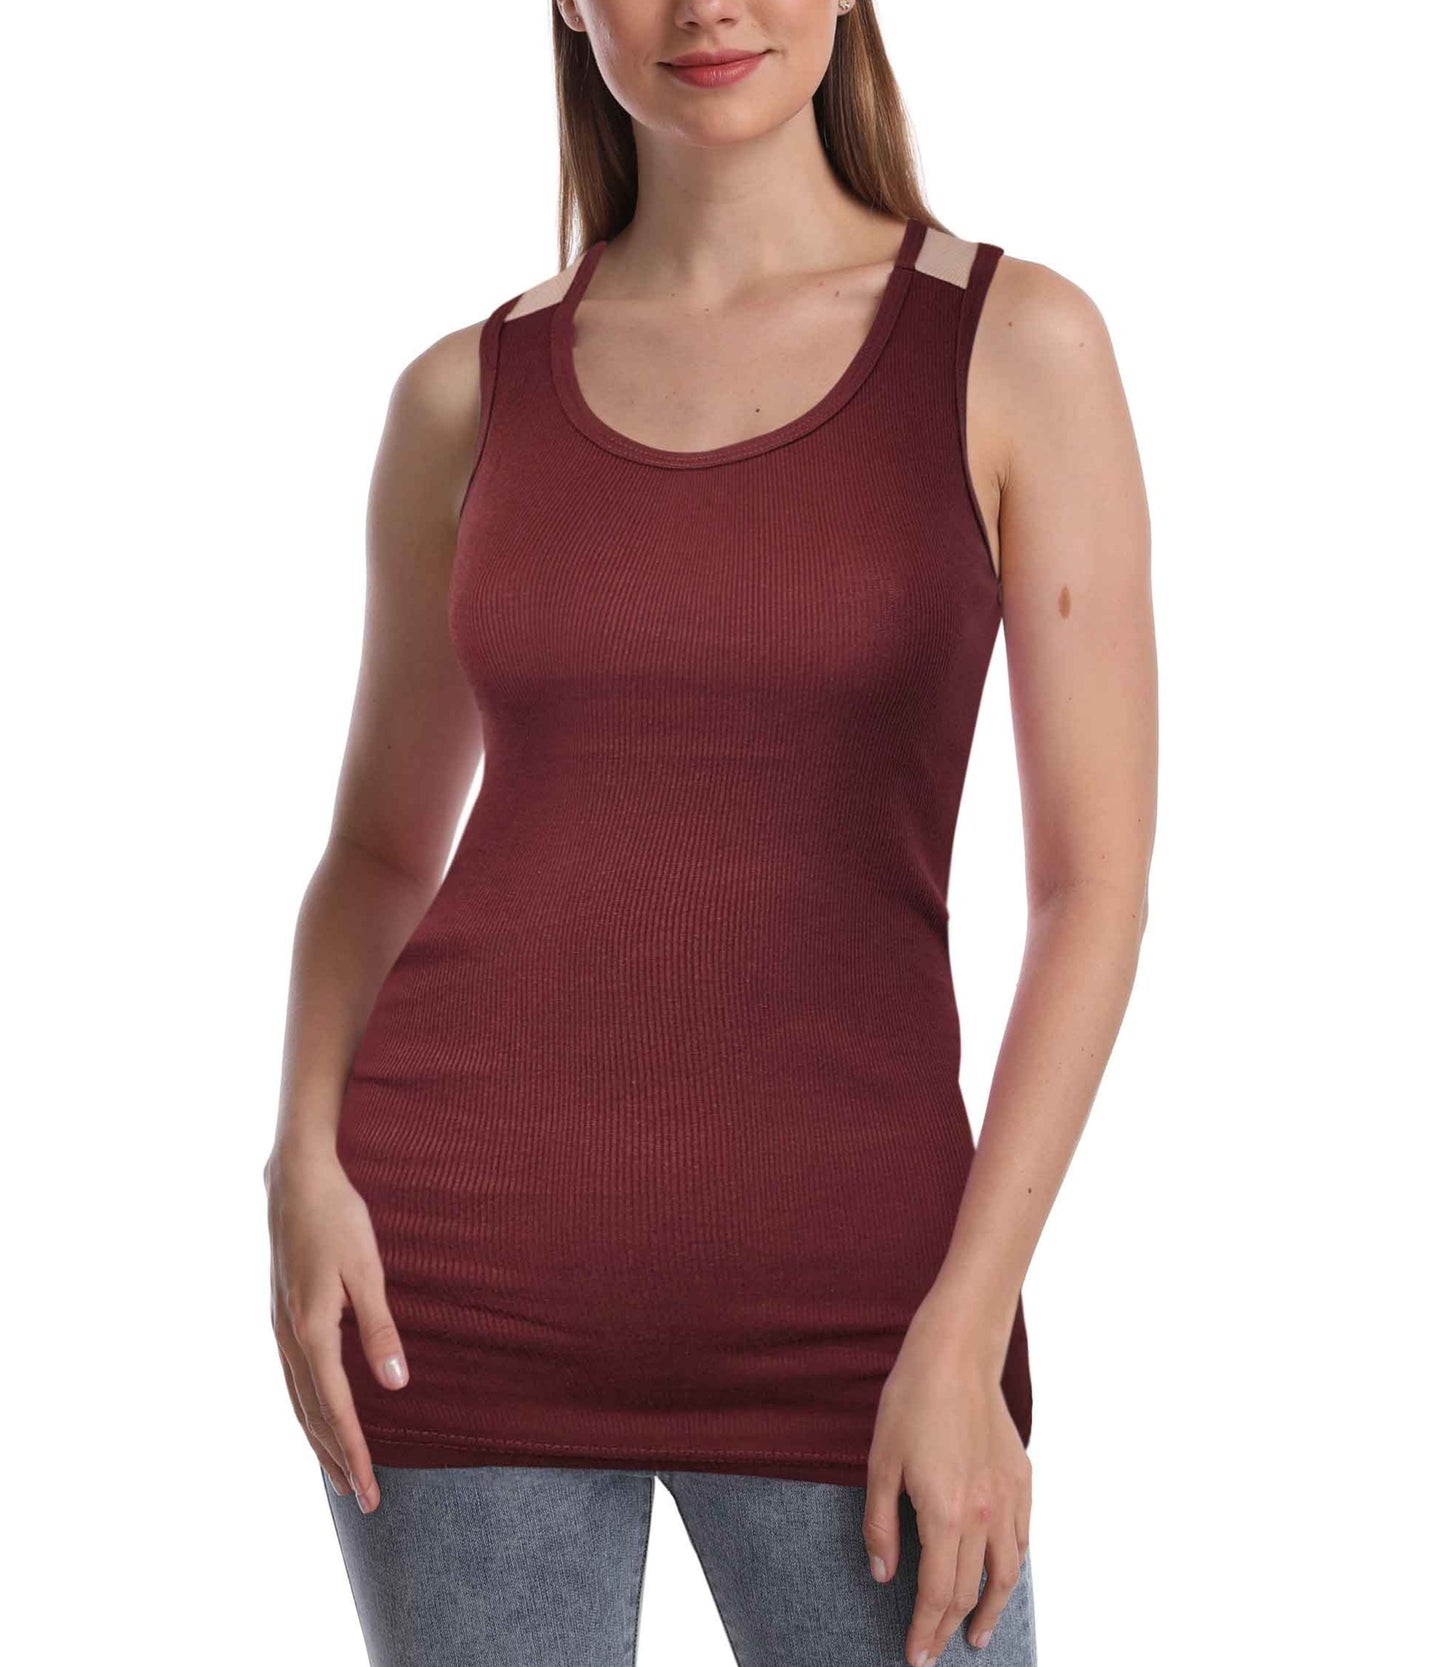 SUMONA Women Round Neck Accent Two Tones Casual Basic Ribbed Tank Top